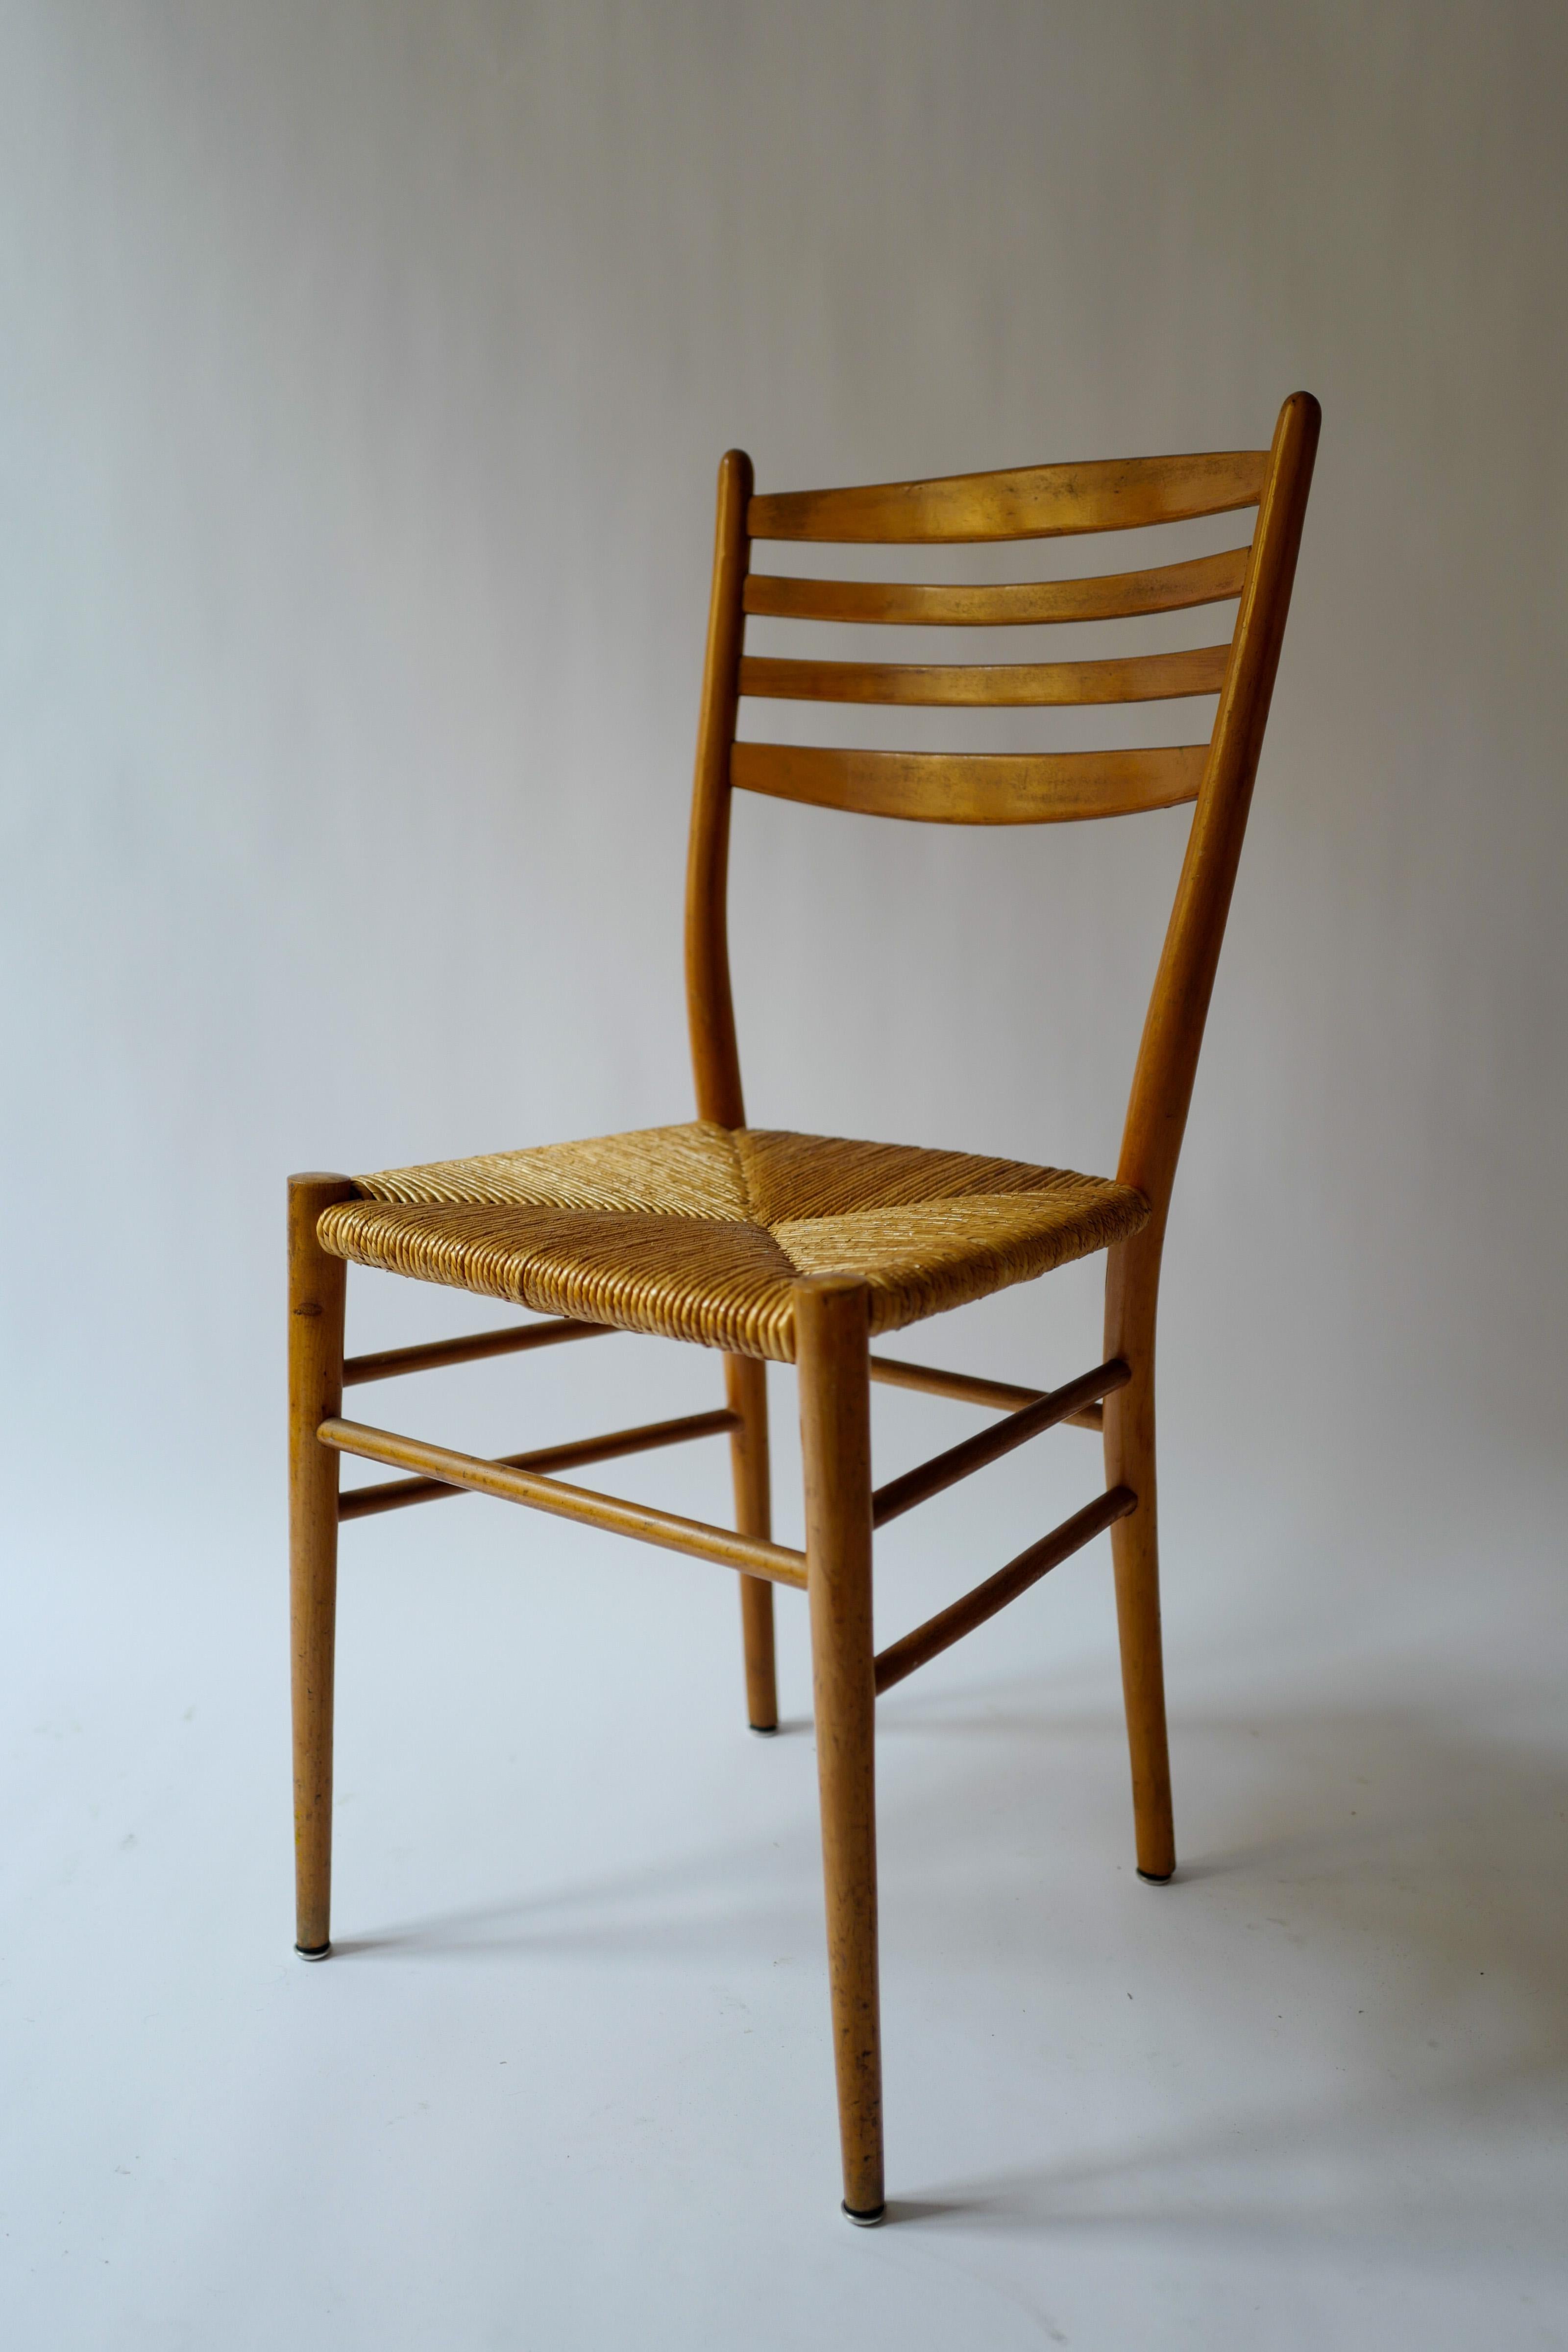 Wood and woven wicker chair in the style of Gio Ponti from Paris, France 1950's.